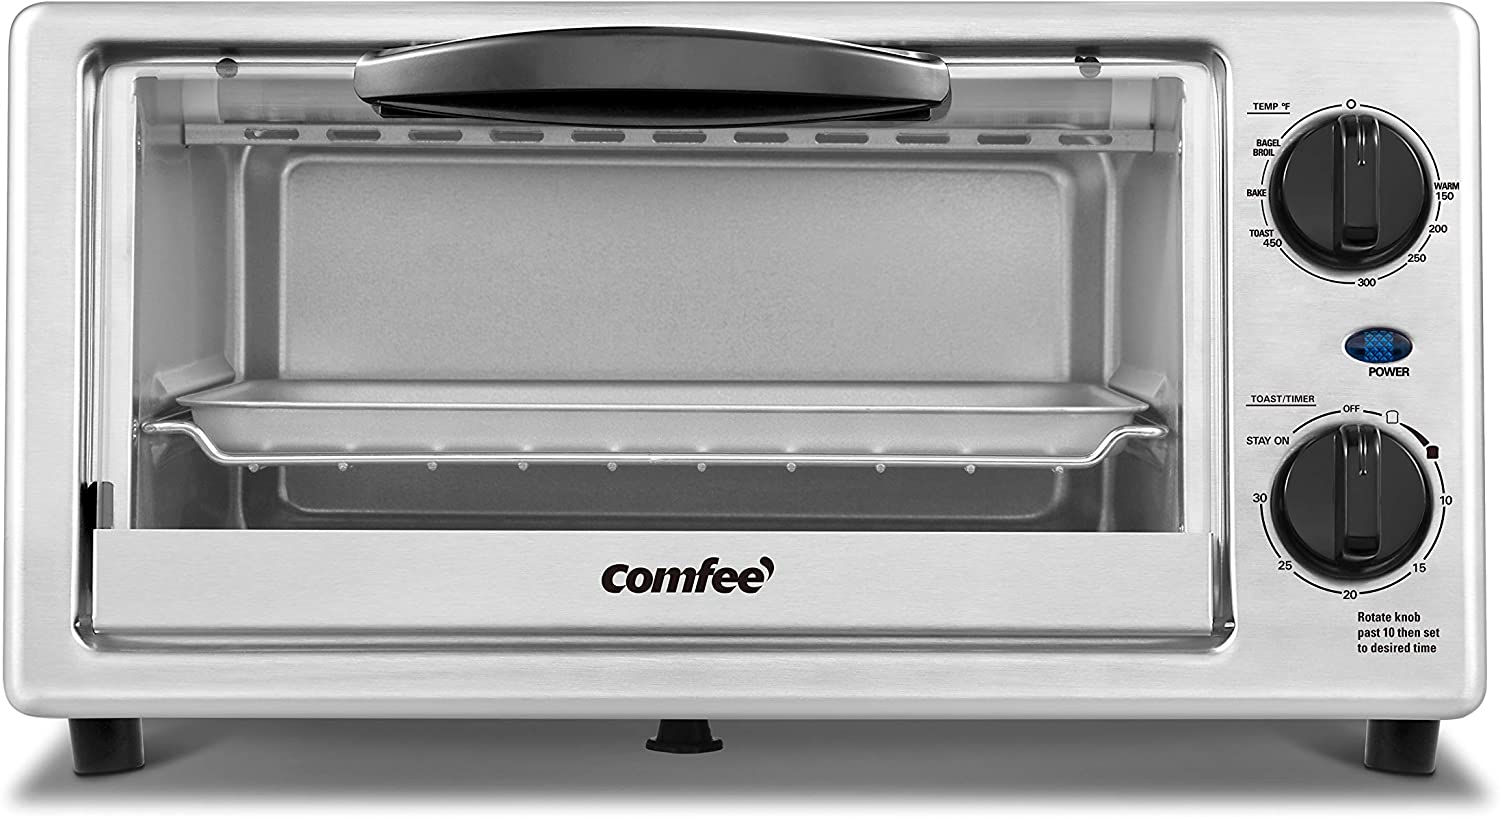 COMFEE’ Compact Stainless Steel Countertop Toaster Oven